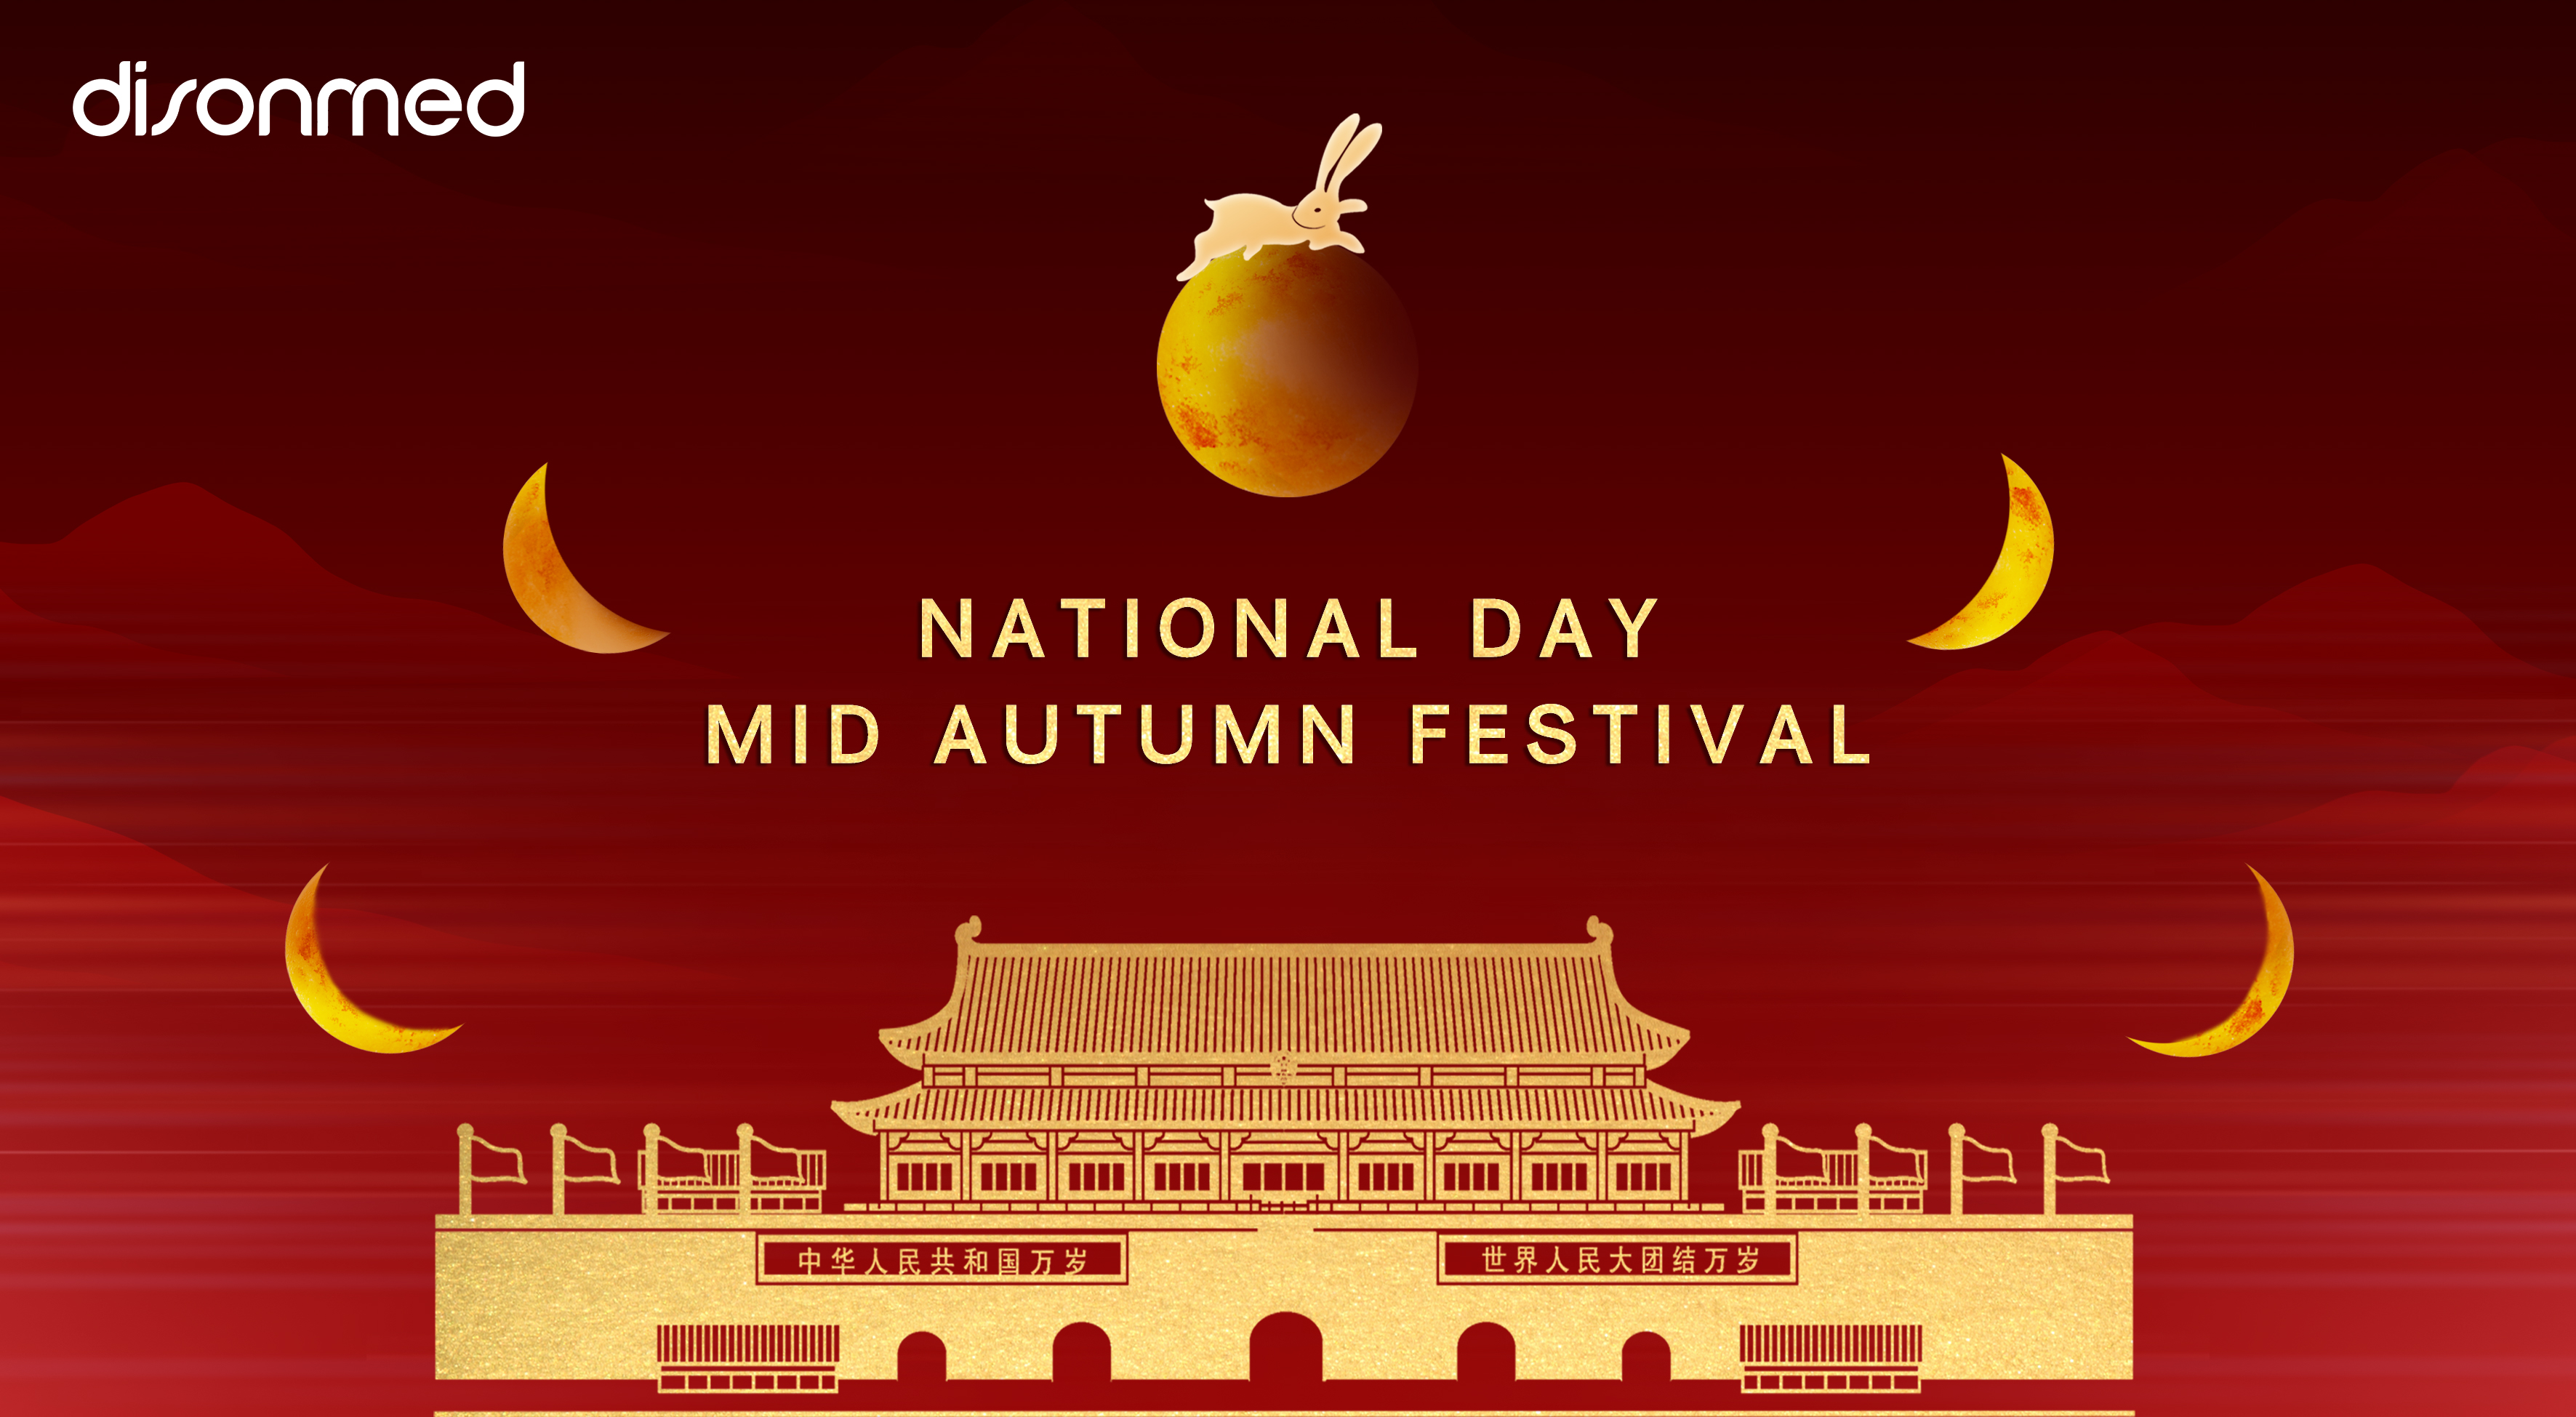 There is a kind of happiness called reunion, when the mid autumn festival meets the national day, you have a longer version of happiness; Happy Mid-Autumn Festival & National Day 